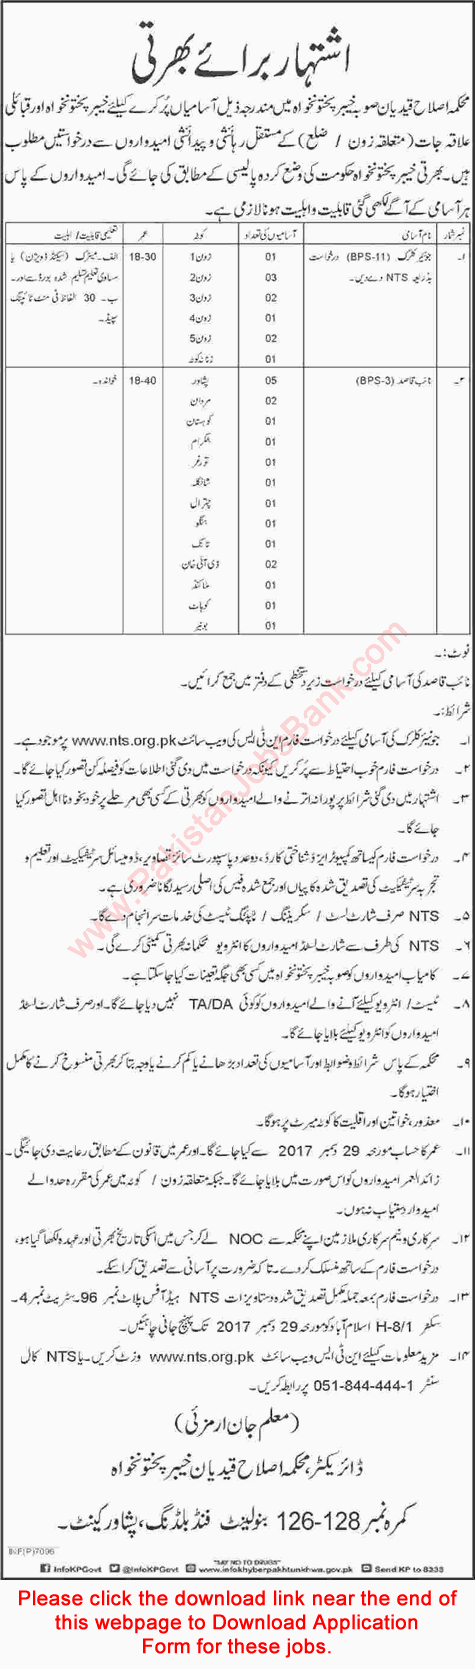 Directorate of Reclamation and Probation KPK Jobs 2017 December NTS Application Form Clerks & Naib Qasid Latest